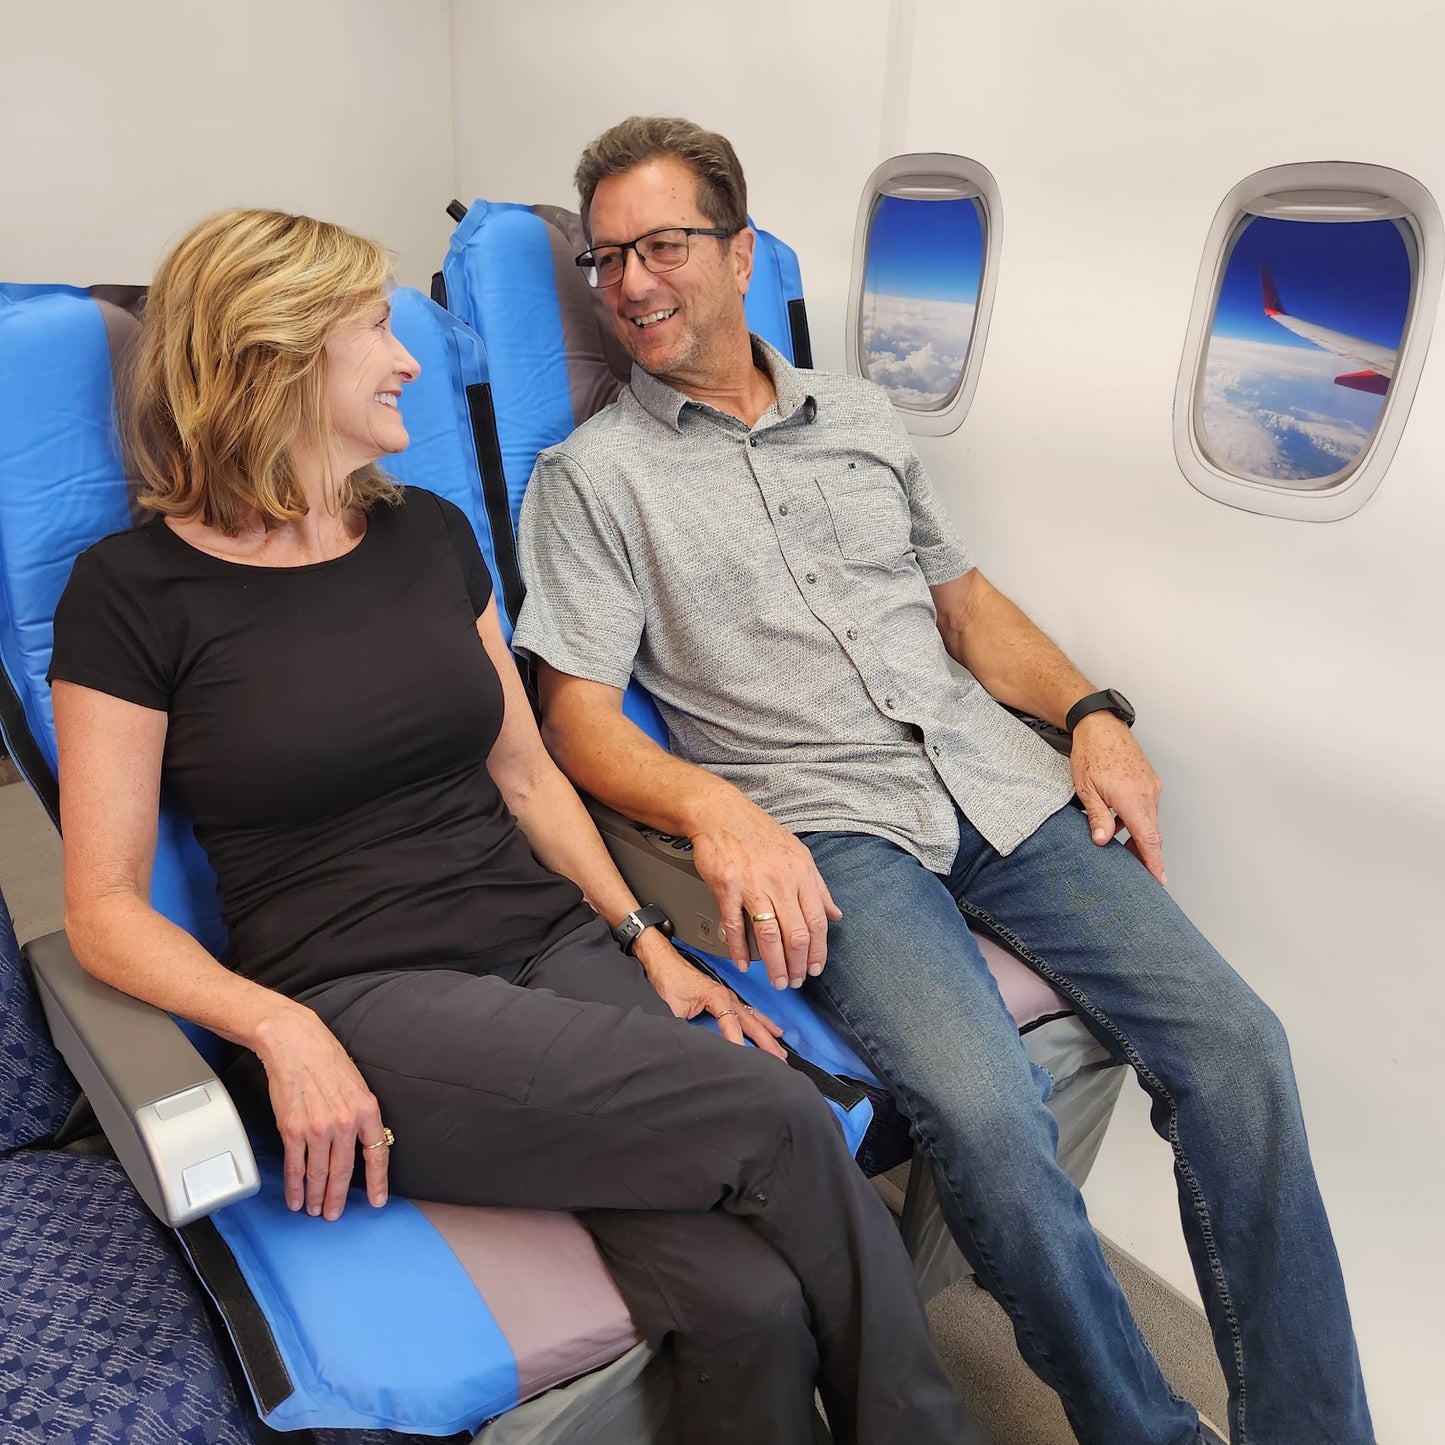 Couple sitting on Jet Seat travel self-inflating cushion preventing jet lag